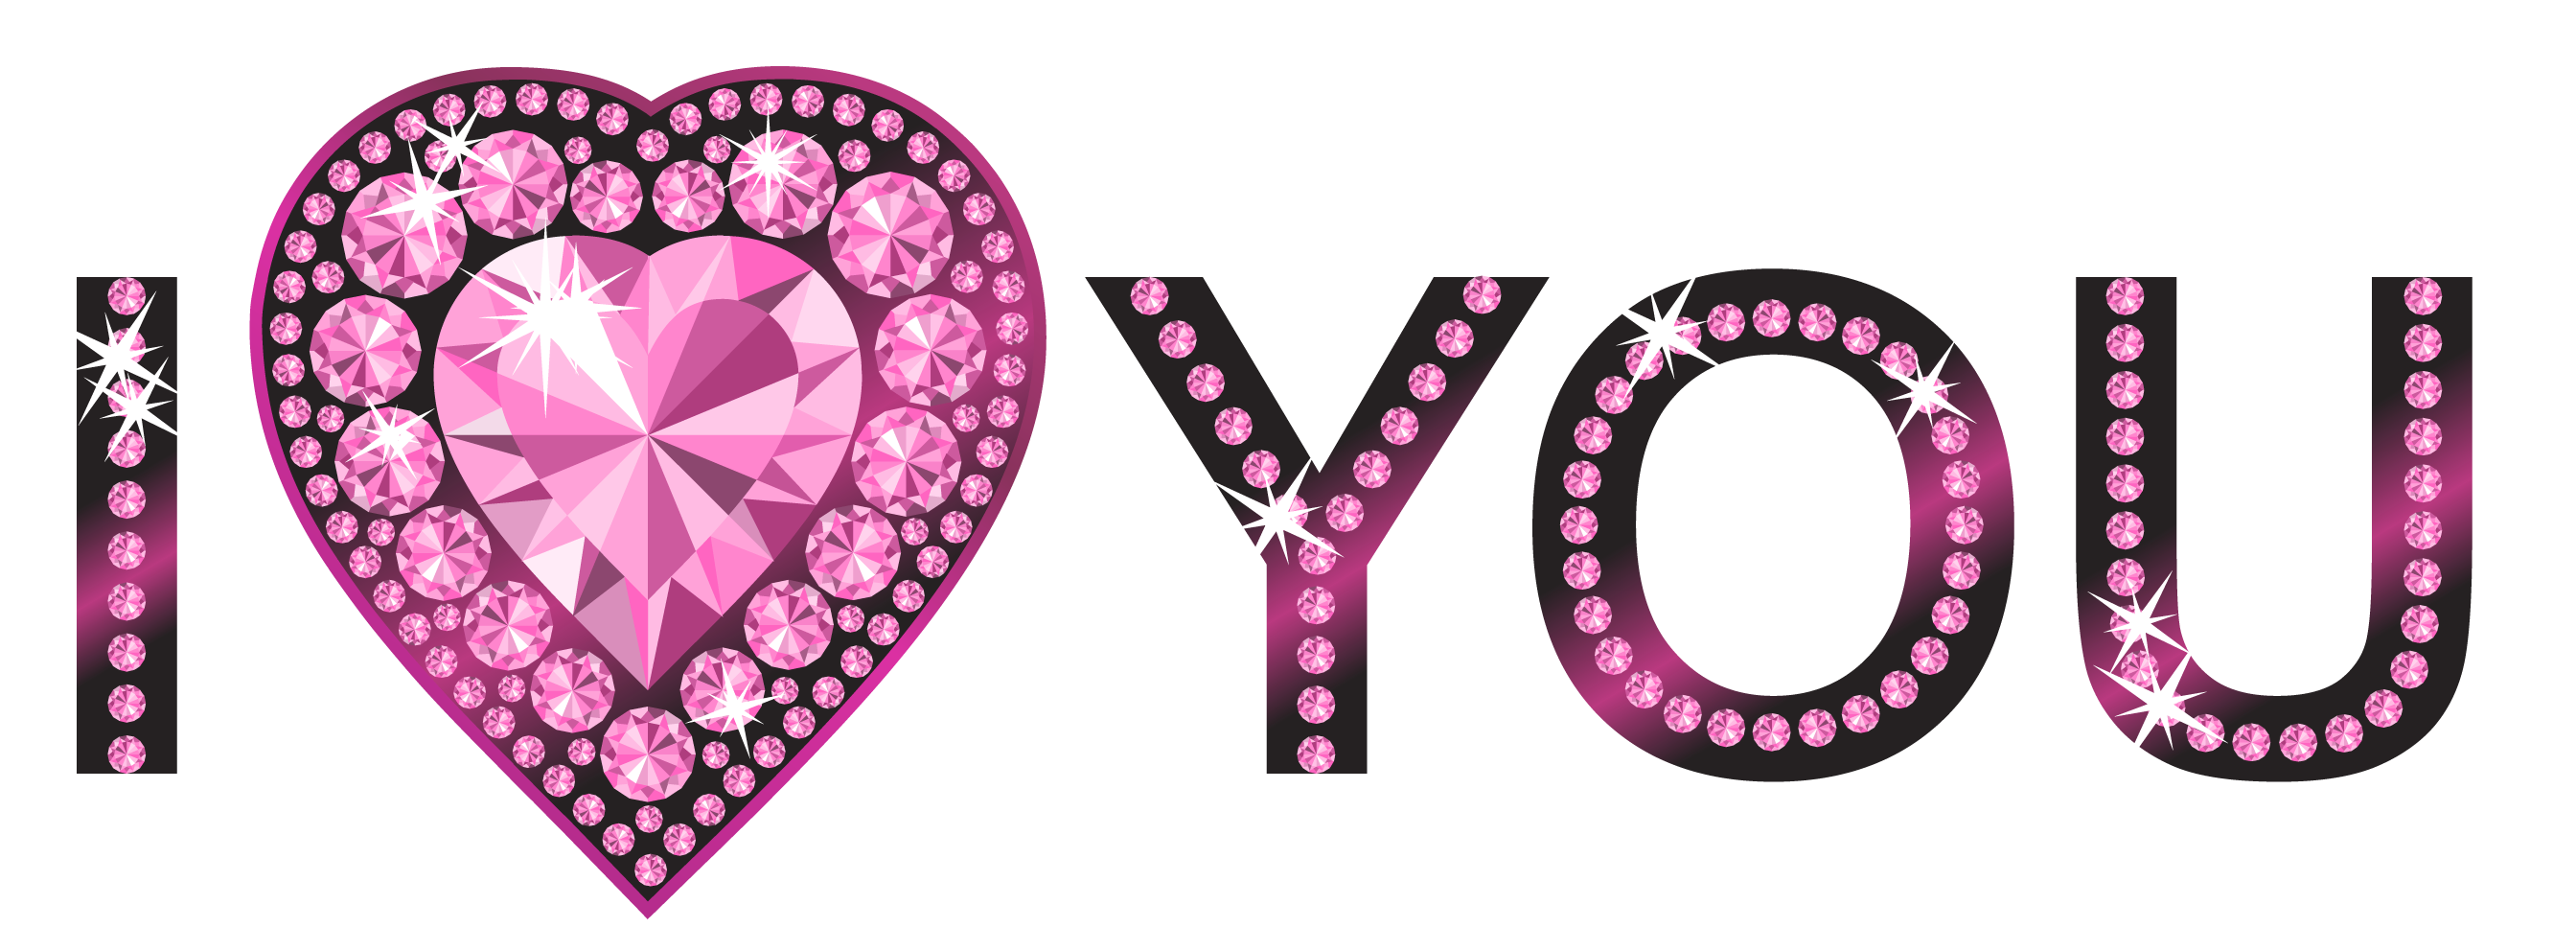 free download clip art i love you - photo #32